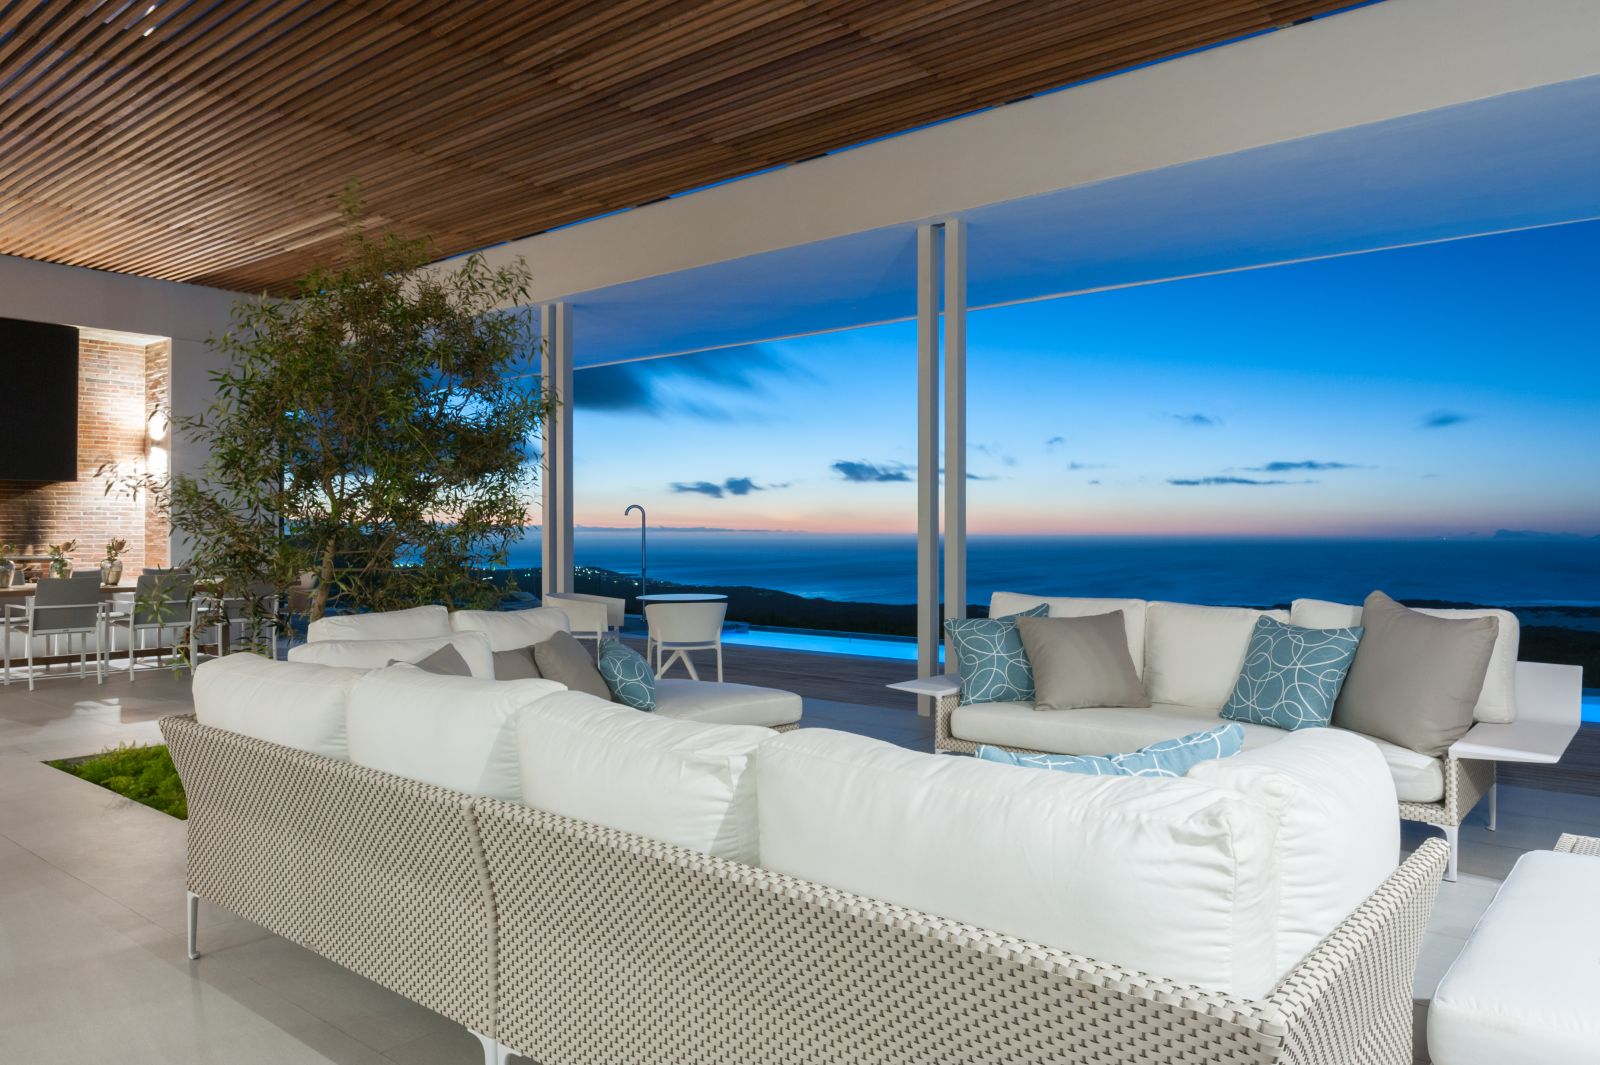 Views from the living area at sunset in Grootbos Private Villas South Africa